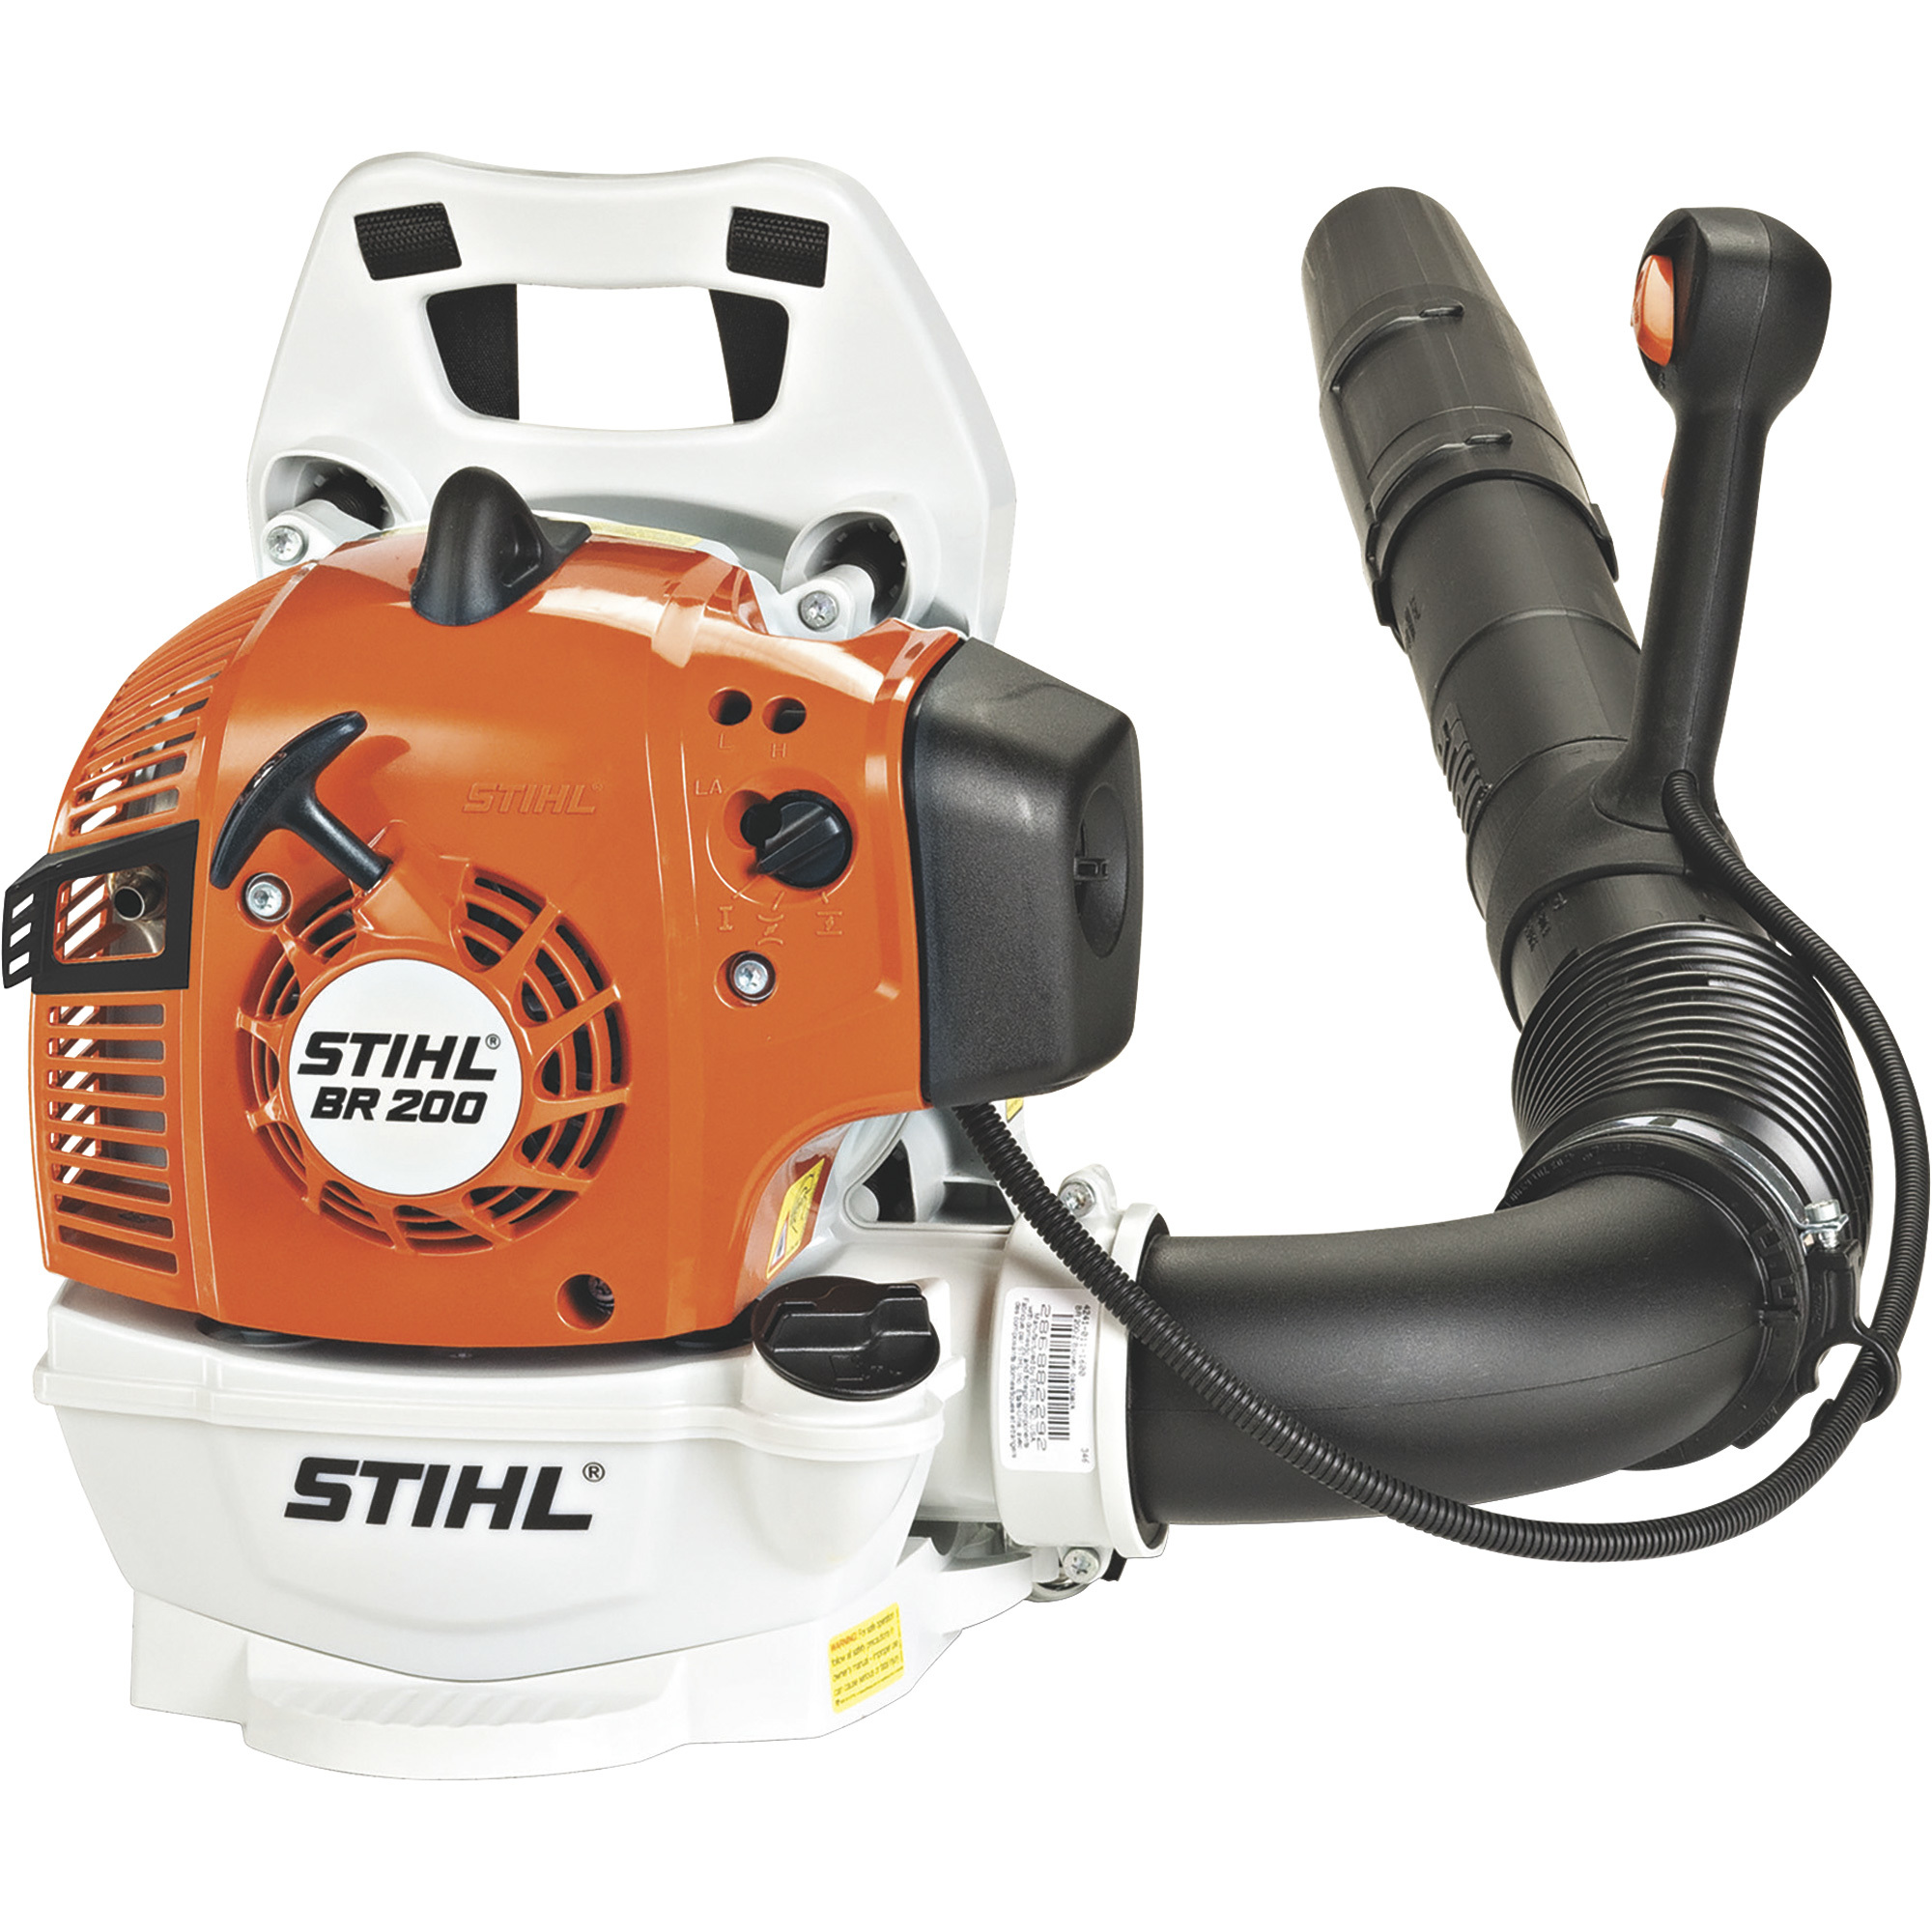 Stihl BR Series Gas-Powered Backpack Blower â 27.2cc, 125 MPH, 400 CFM, Model BR 200